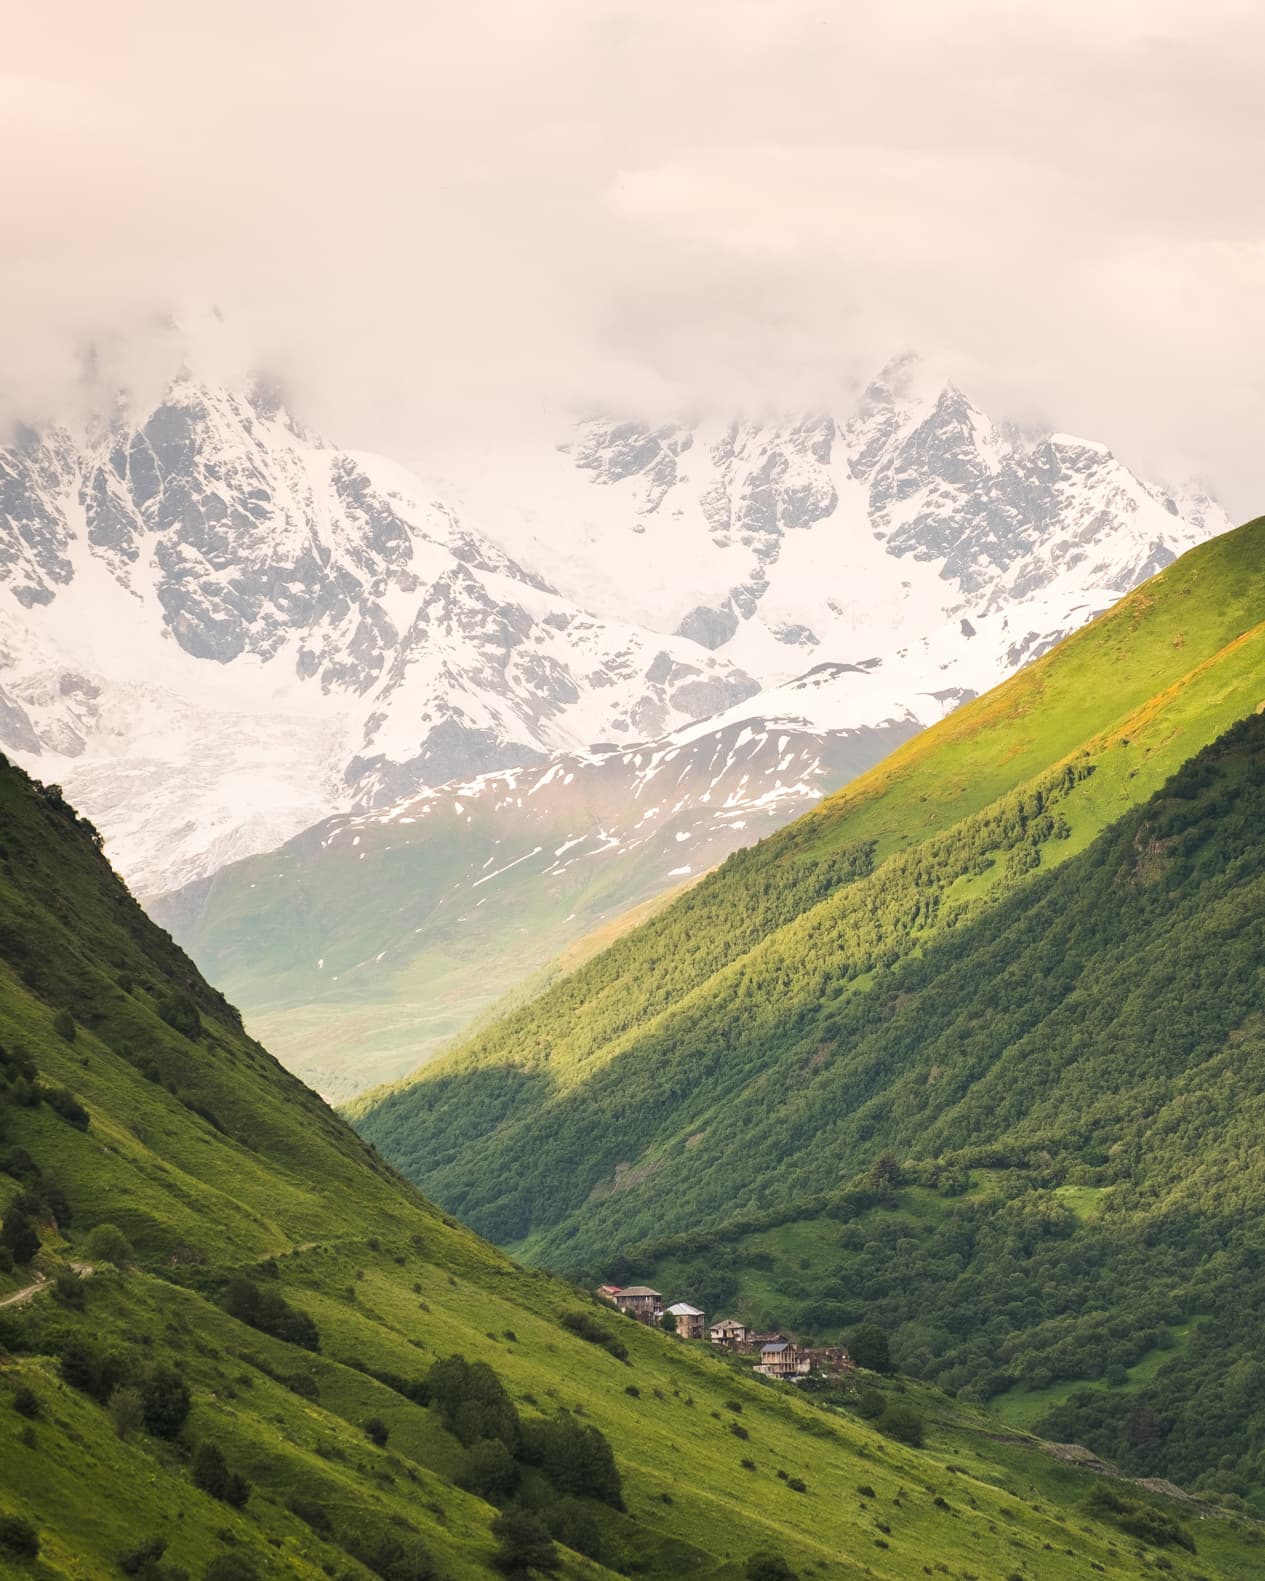 The almost abandoned village of Khalde with towering snow covered peaks, Svaneti, Georgia